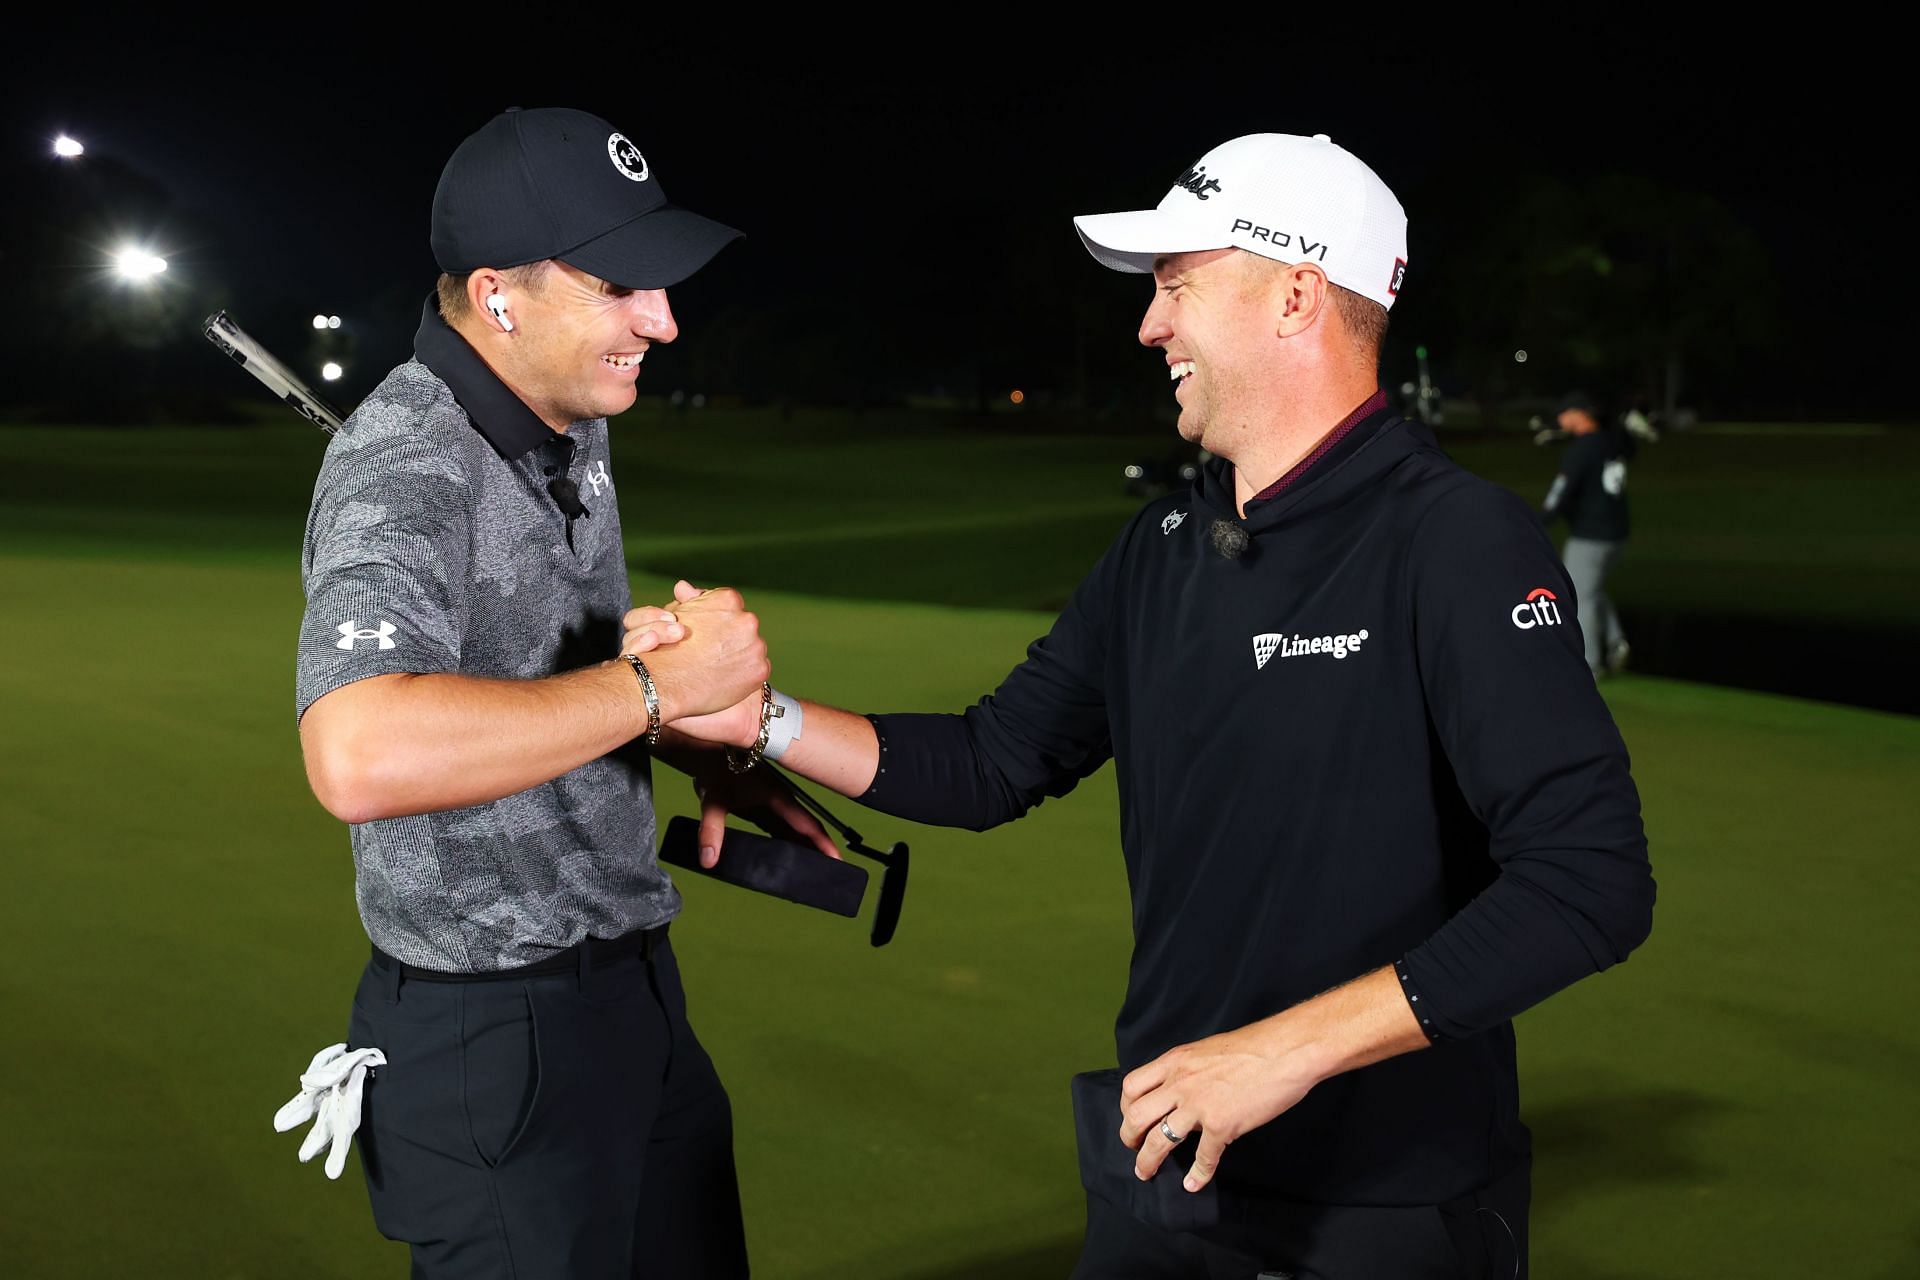 Justin Thomas and Jordan Spieth celebrating their victory at the charity event (Image via Getty).